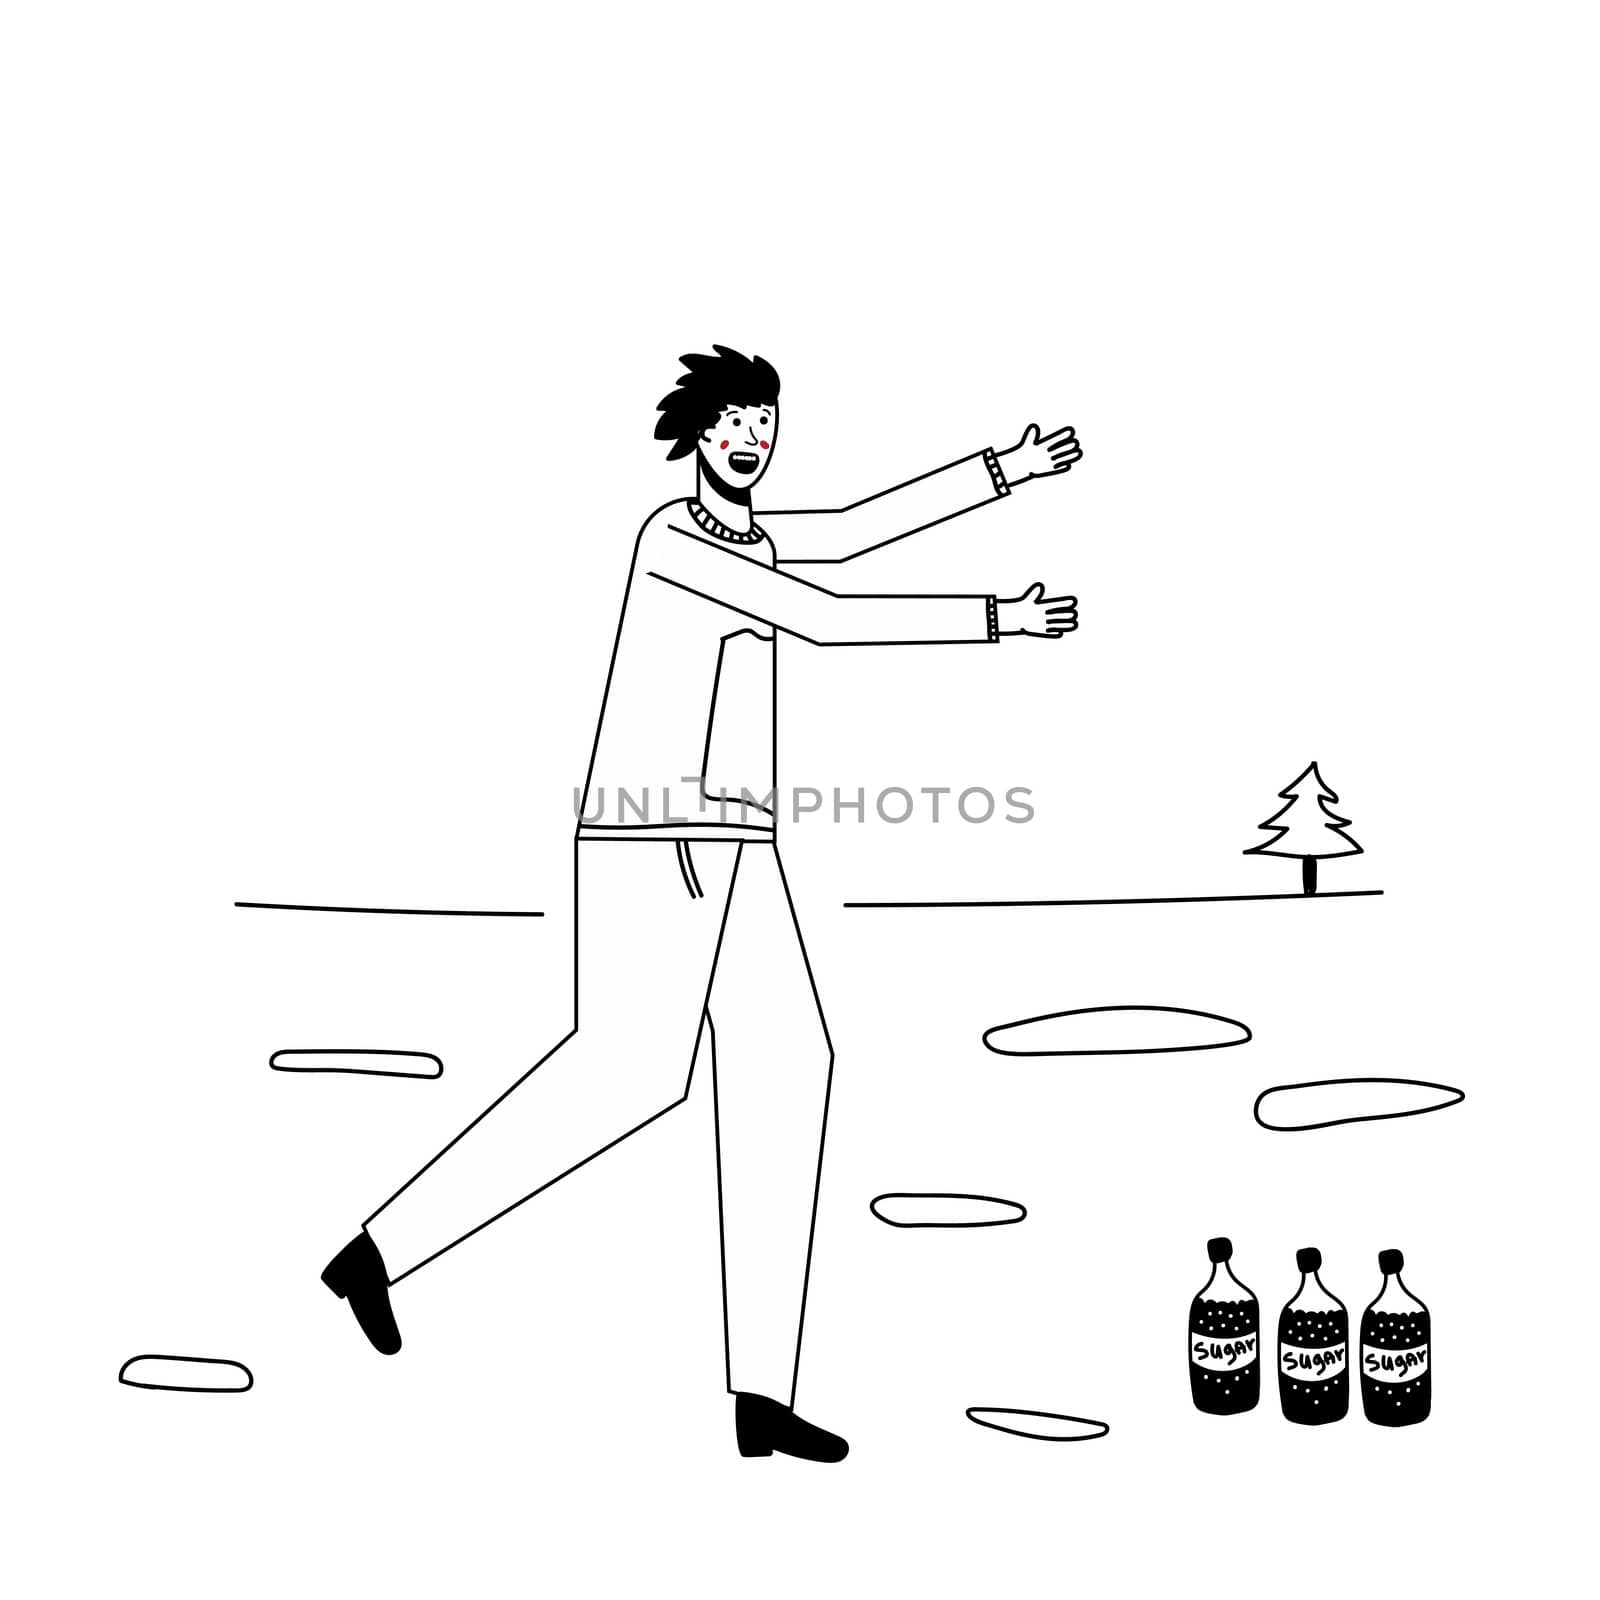 Soda addiction concept illustration. The man runs to the soda bottles. An unhealthy lifestyle, unhealthy diet, and a sweet tooth. illustration. Lines